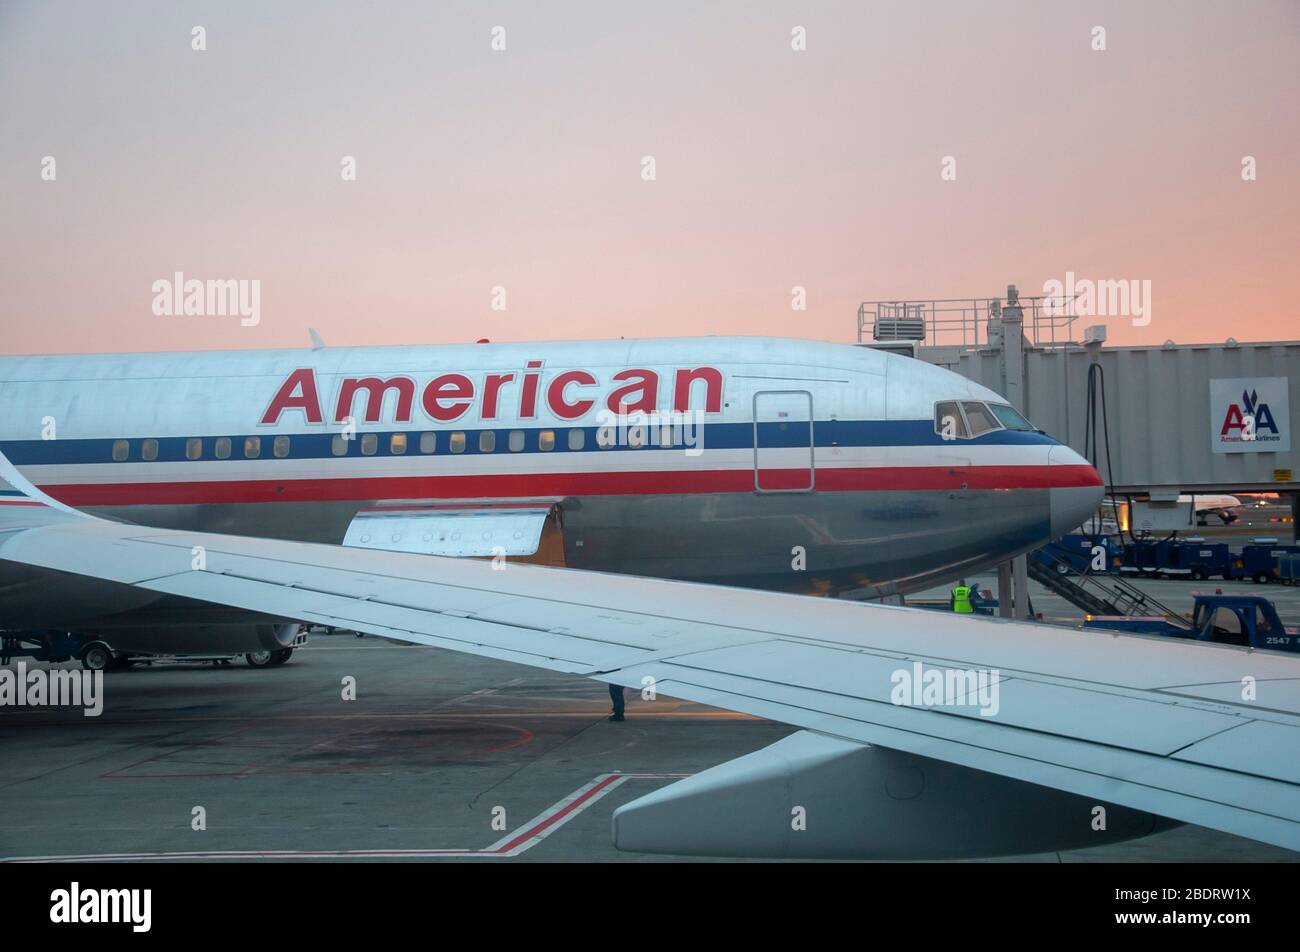 American Airlines passenger jet in Seattle WA Stock Photo